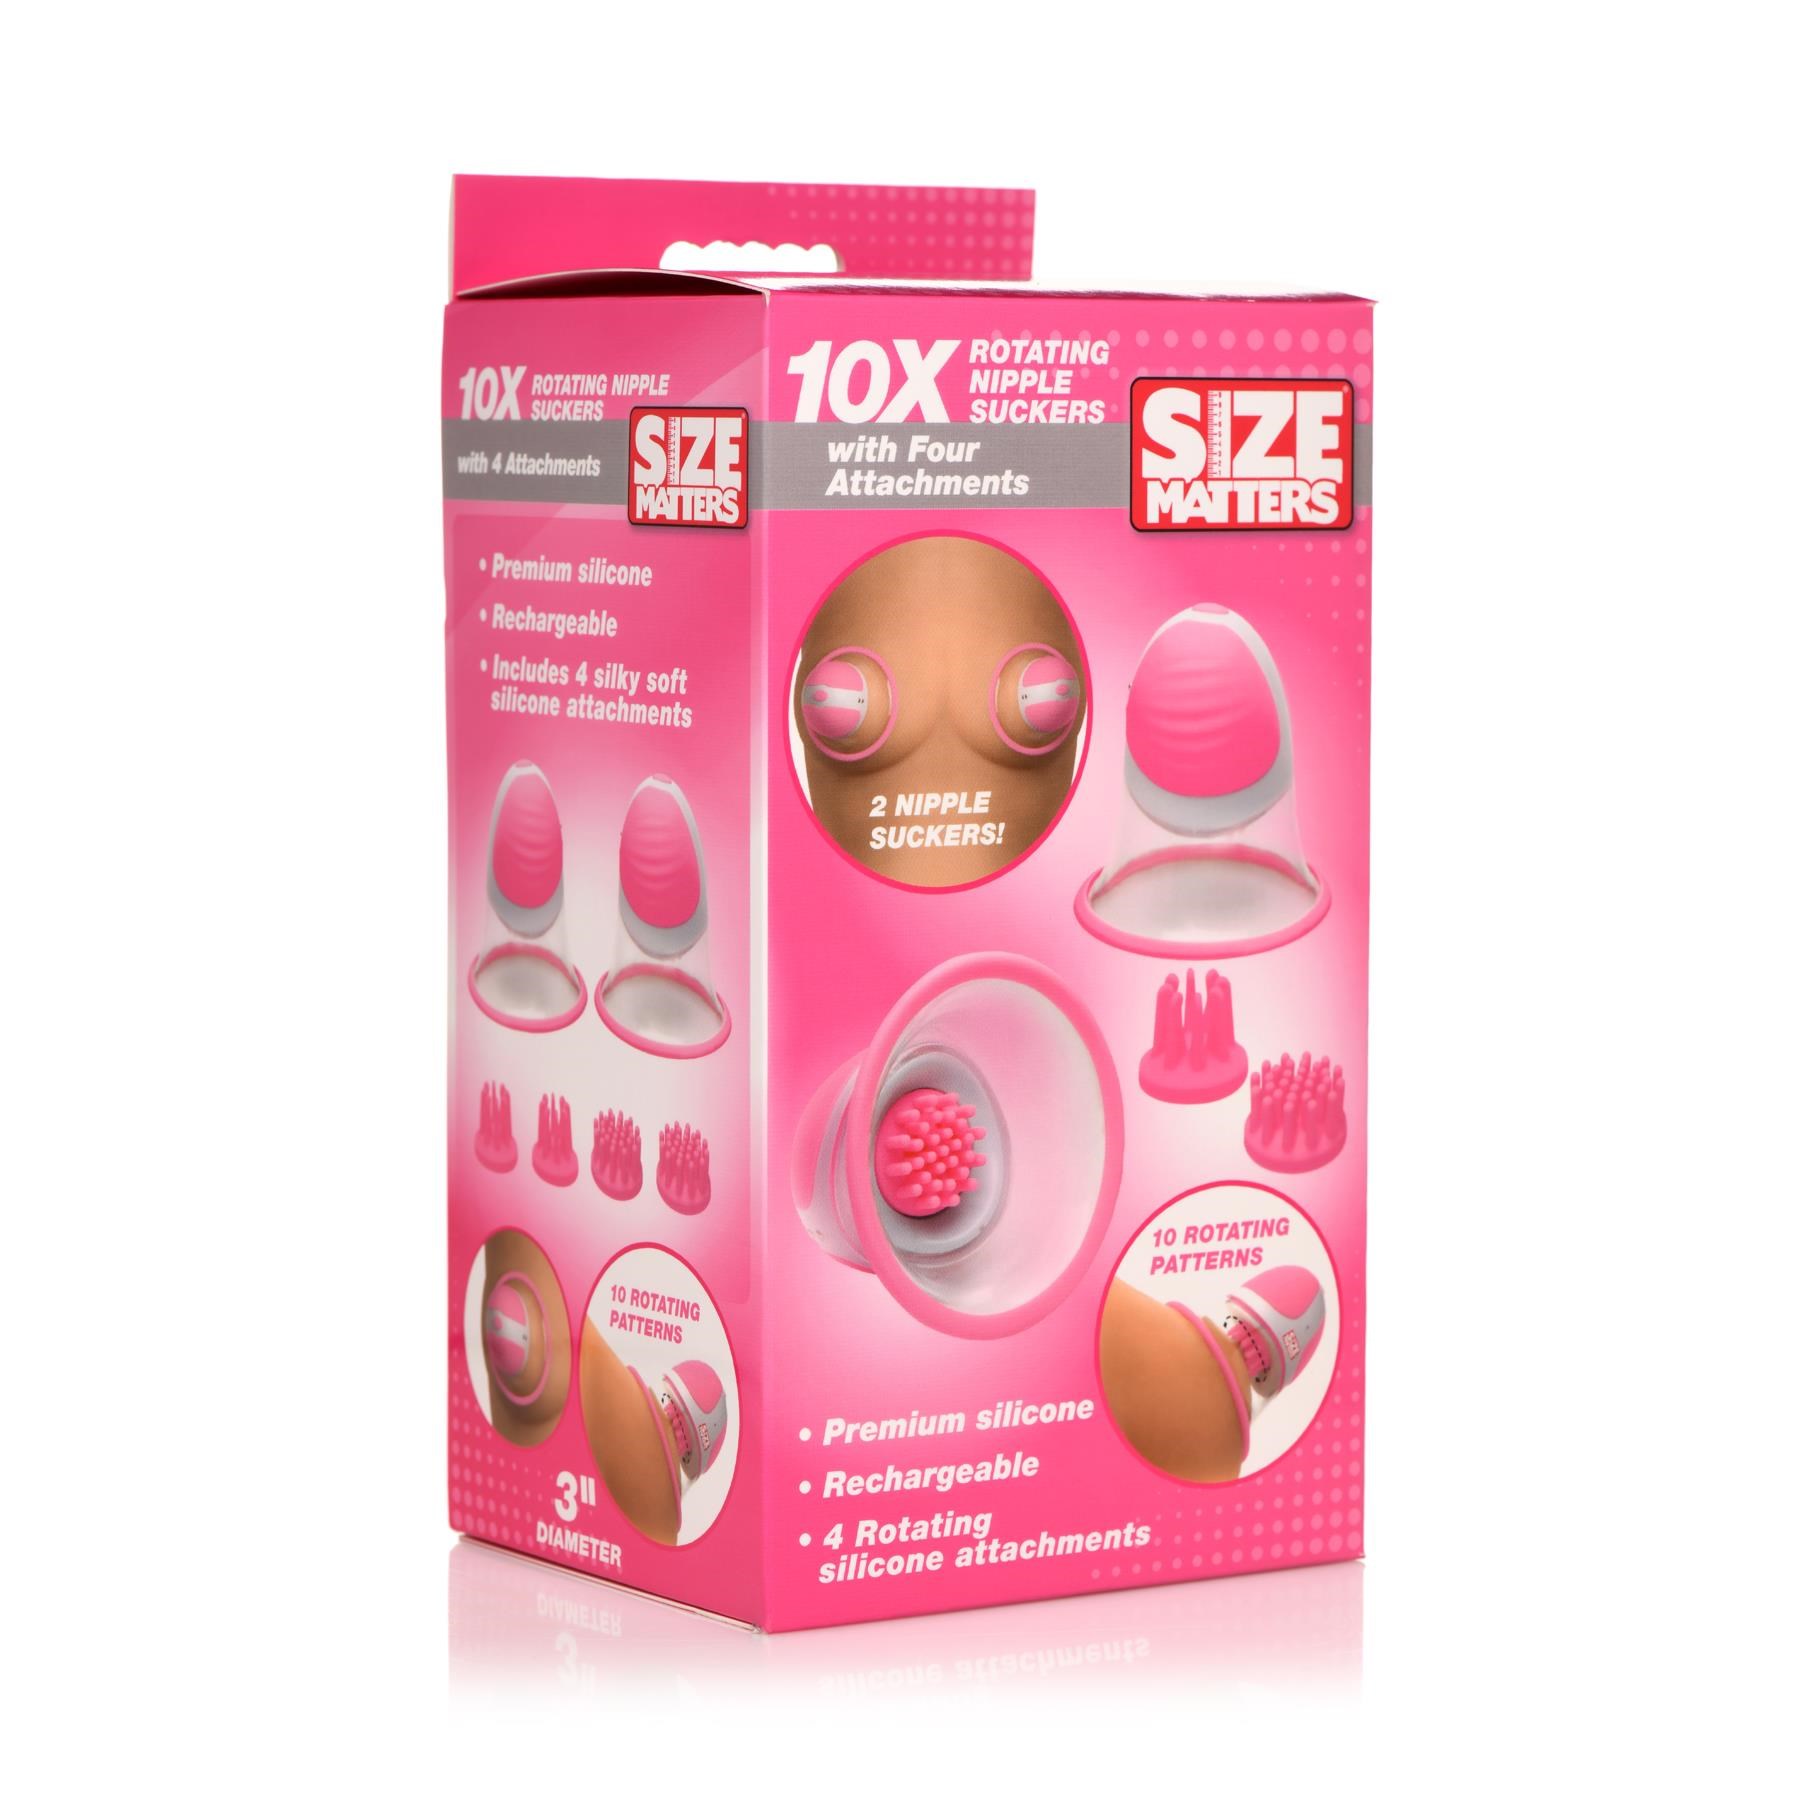 Size Matters Rotating Nipple Suckers With Attachments - Packaging Shot